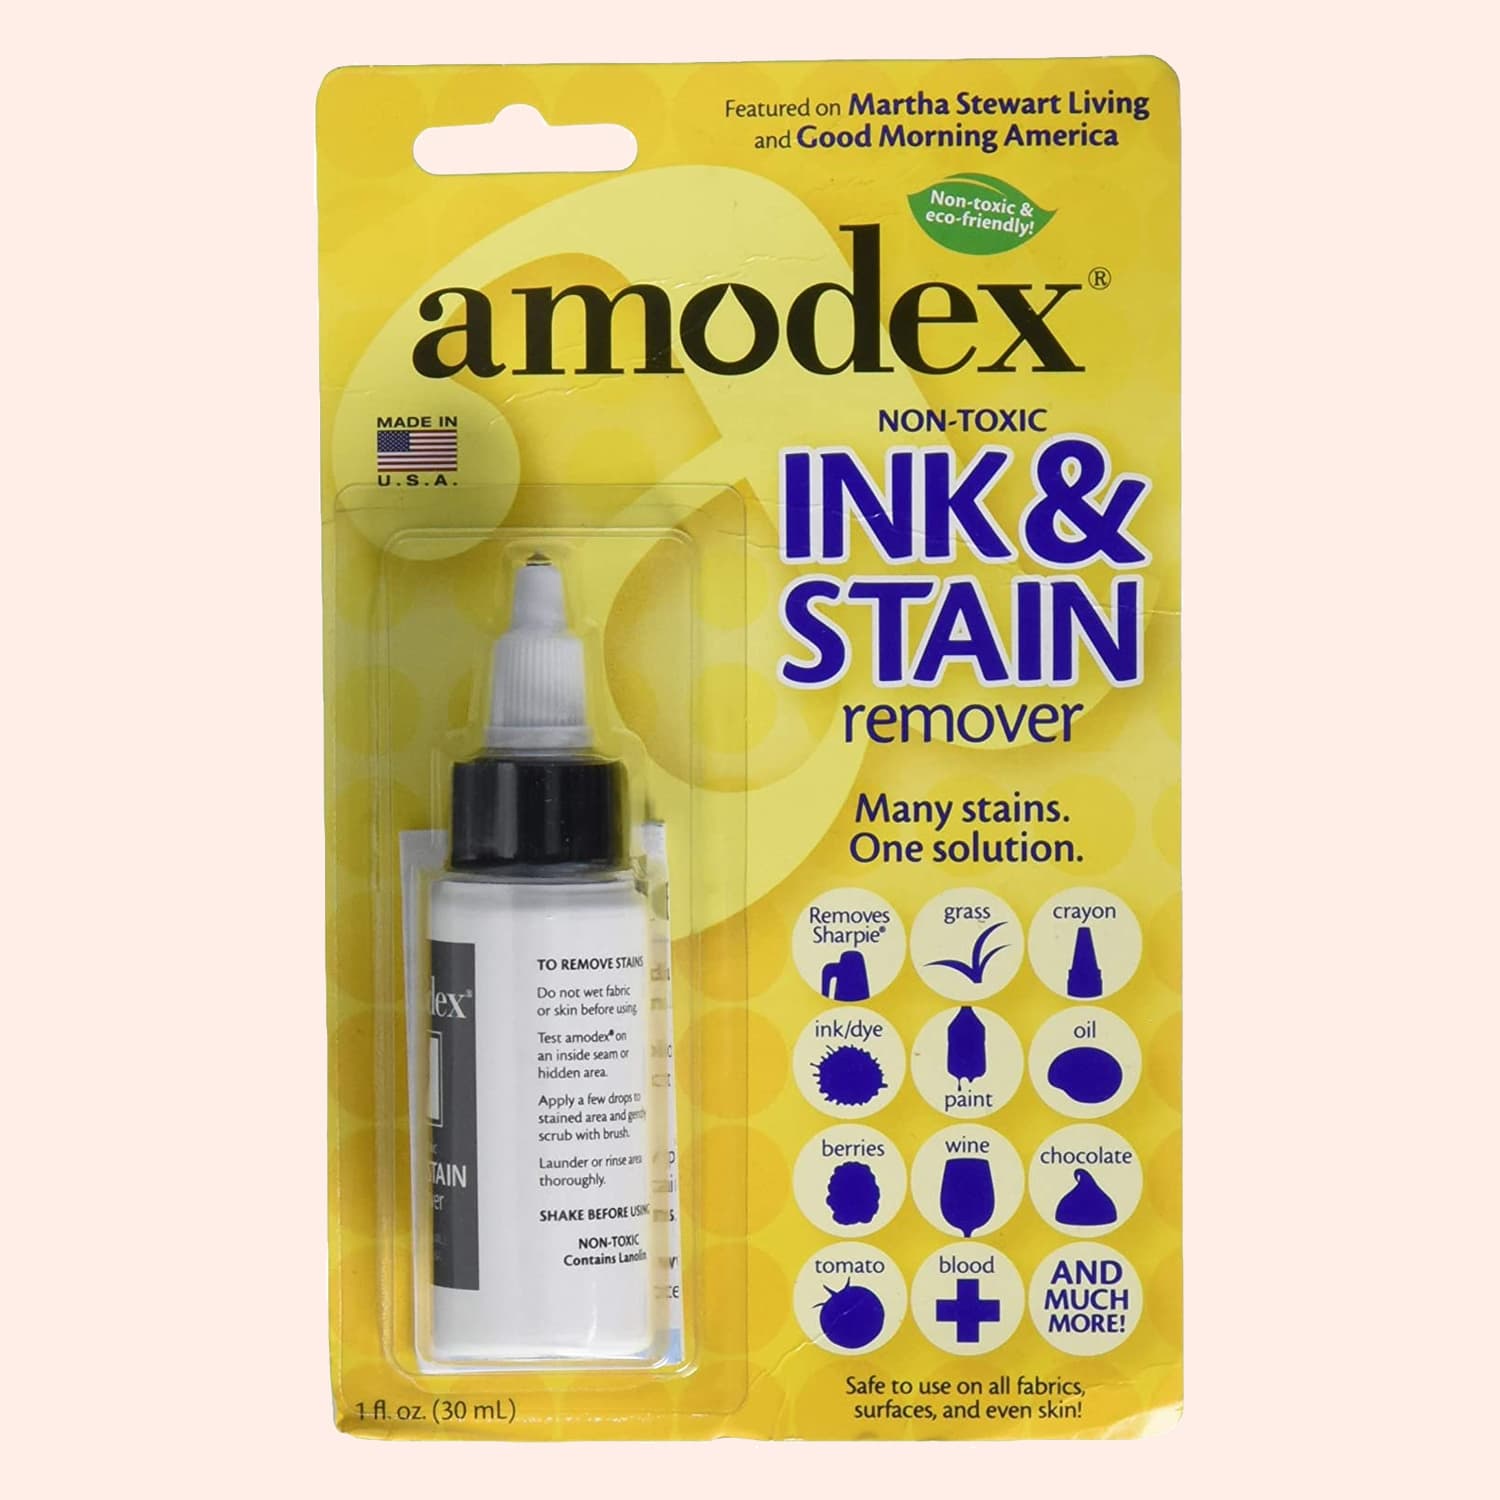 Stain Solutions - Amodex Stain Remover